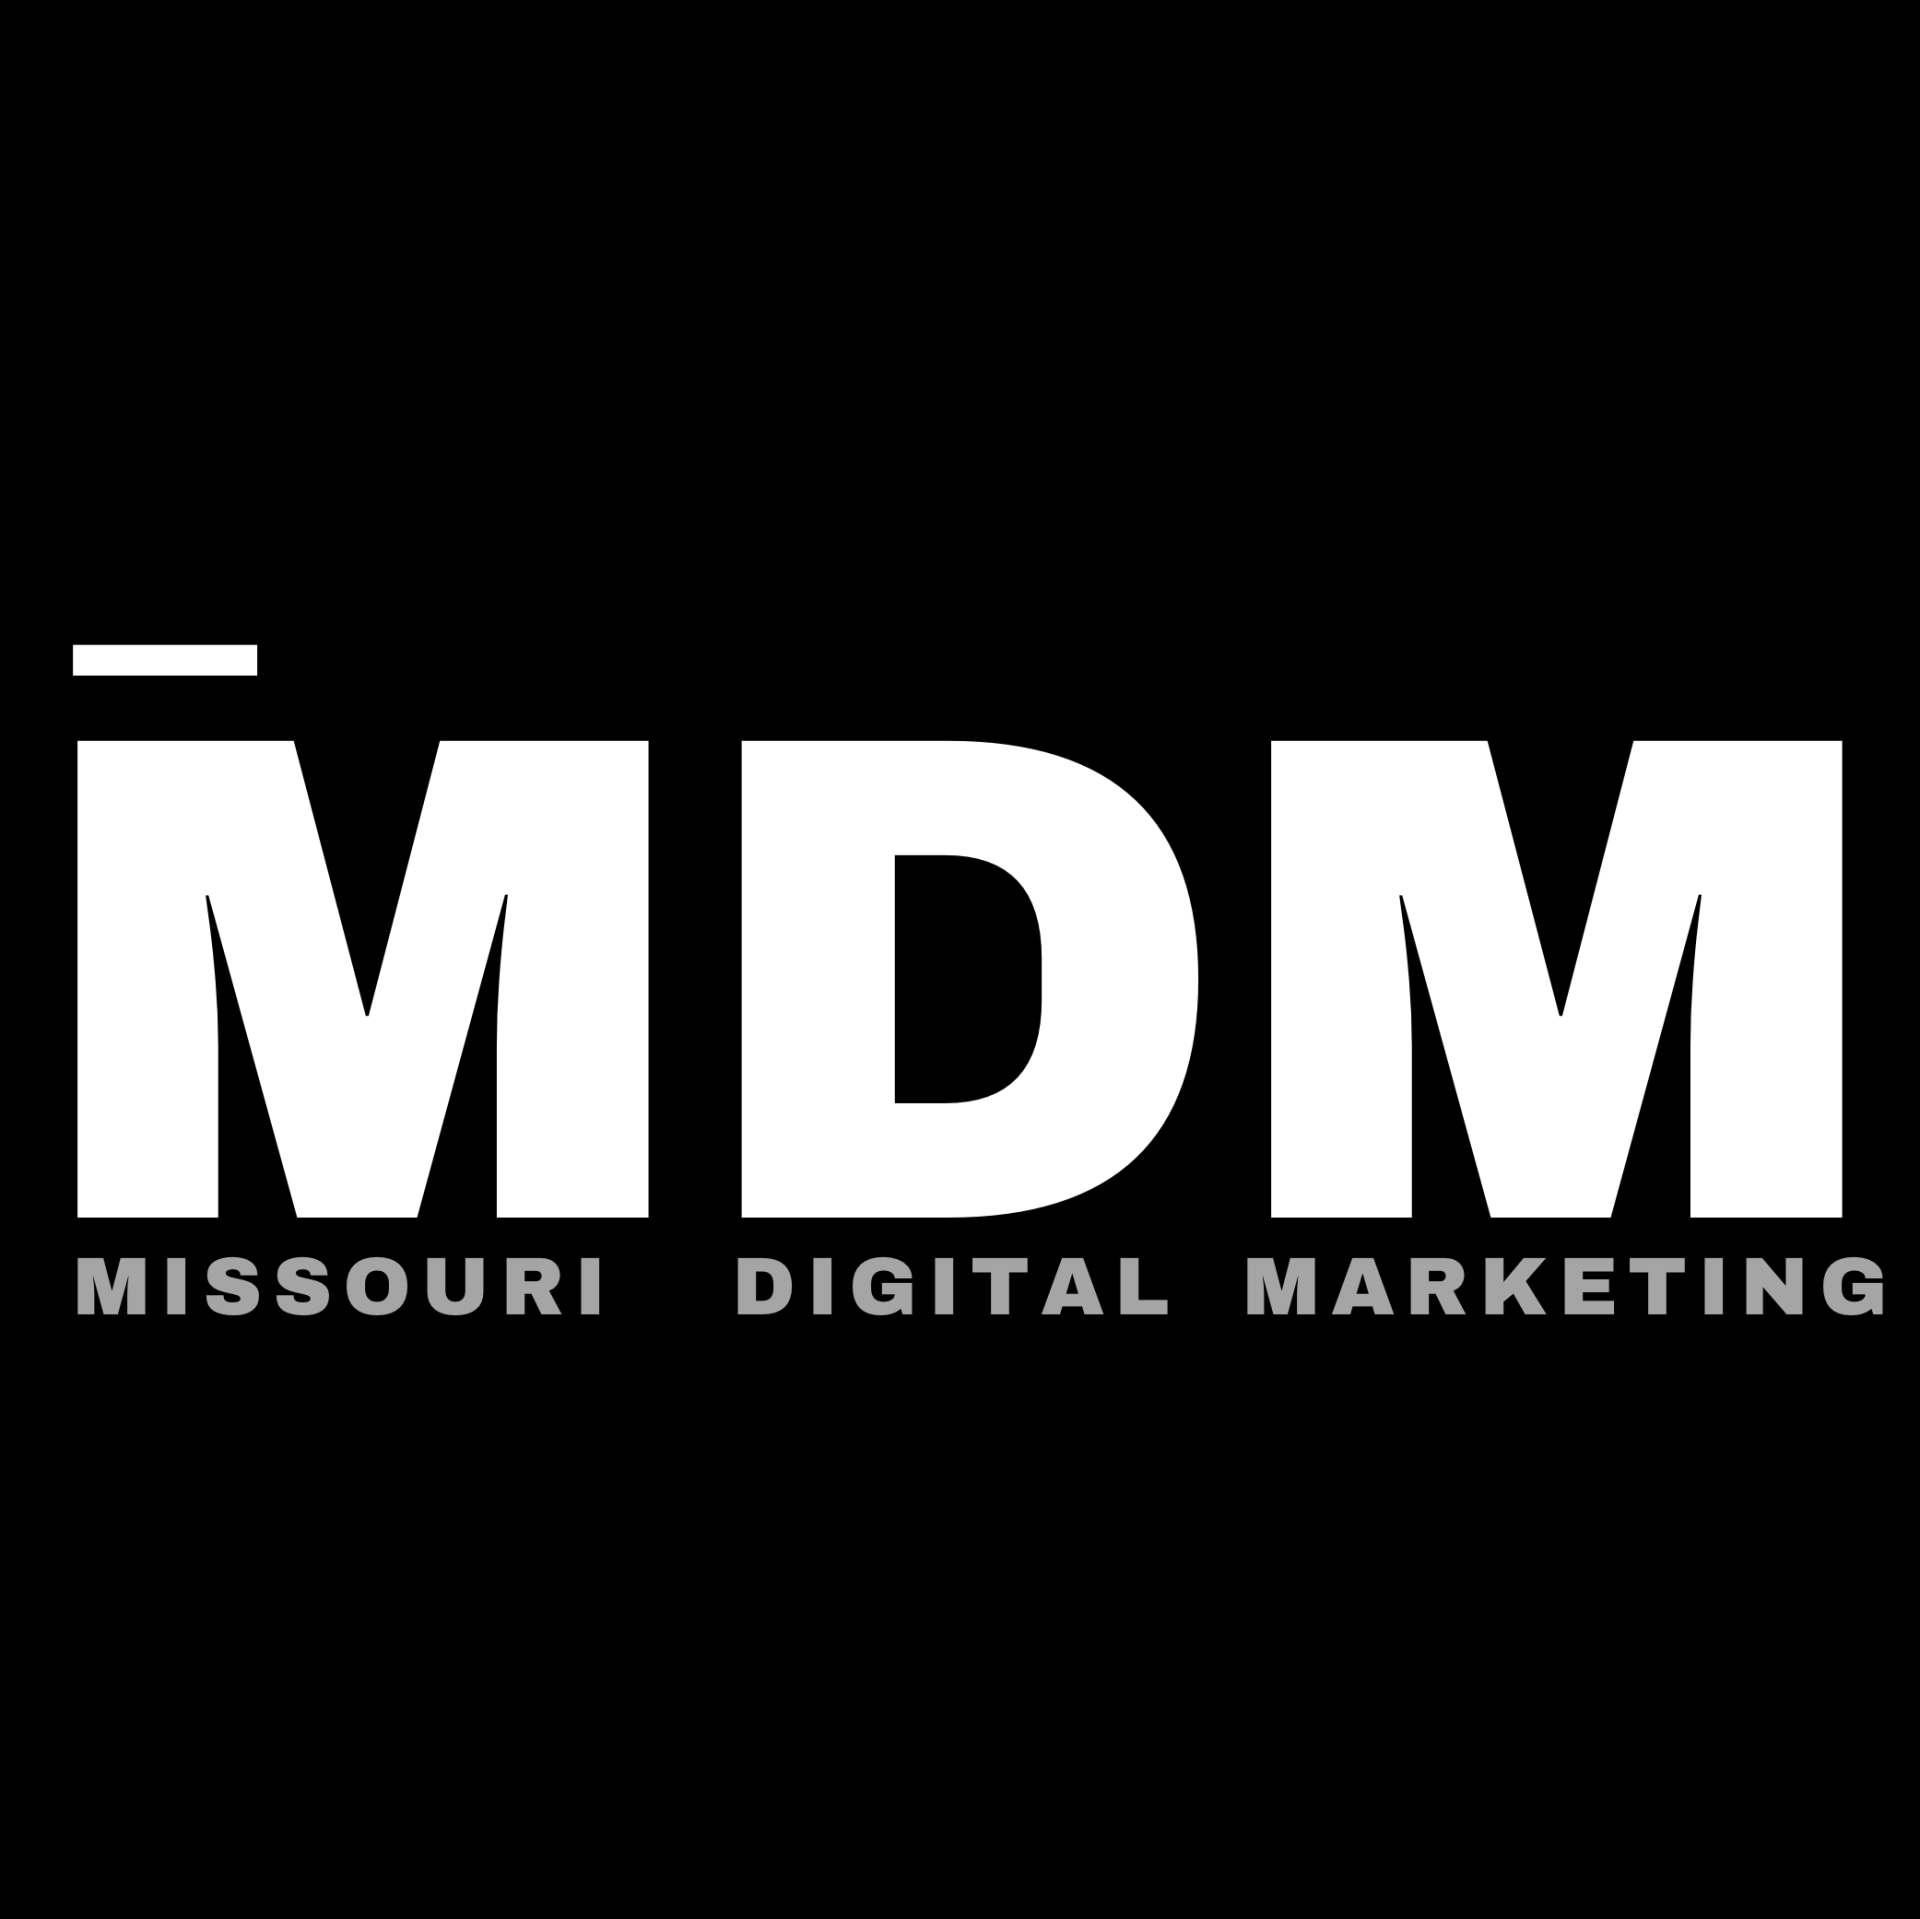 the logo for missouri digital marketing is white on a black background .